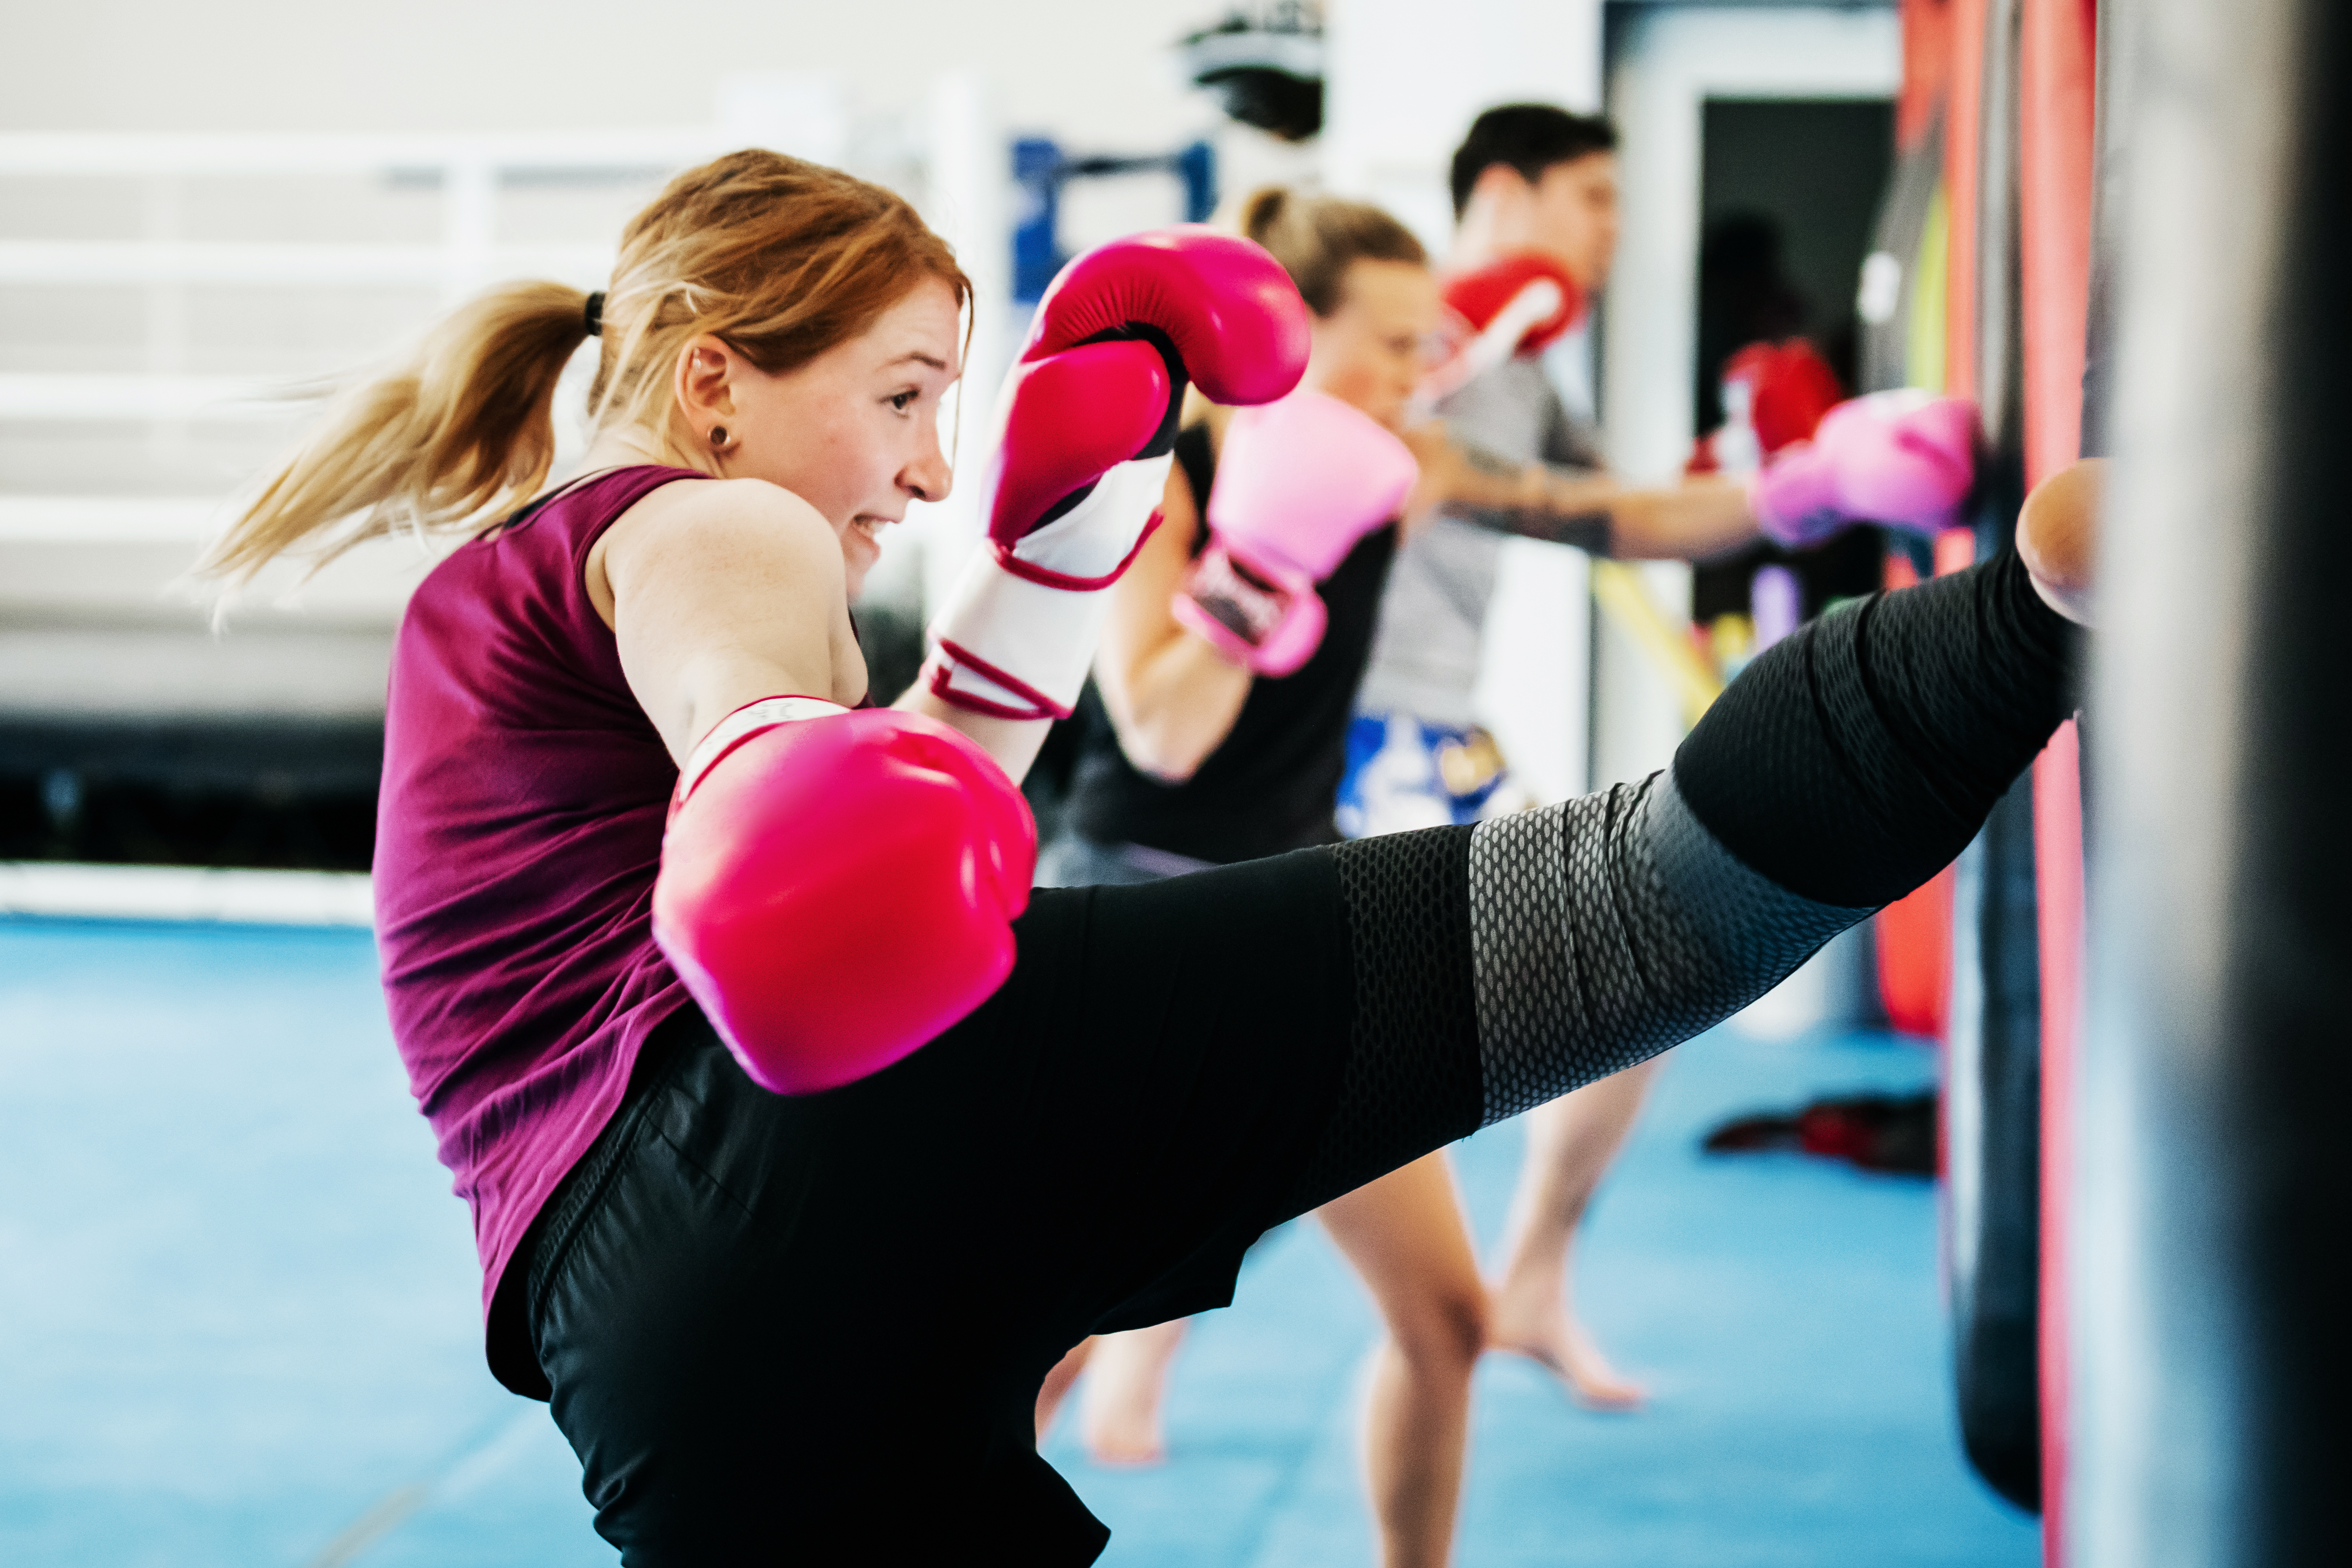 Boxing Workouts to Kick Your Fitness Into High Gear